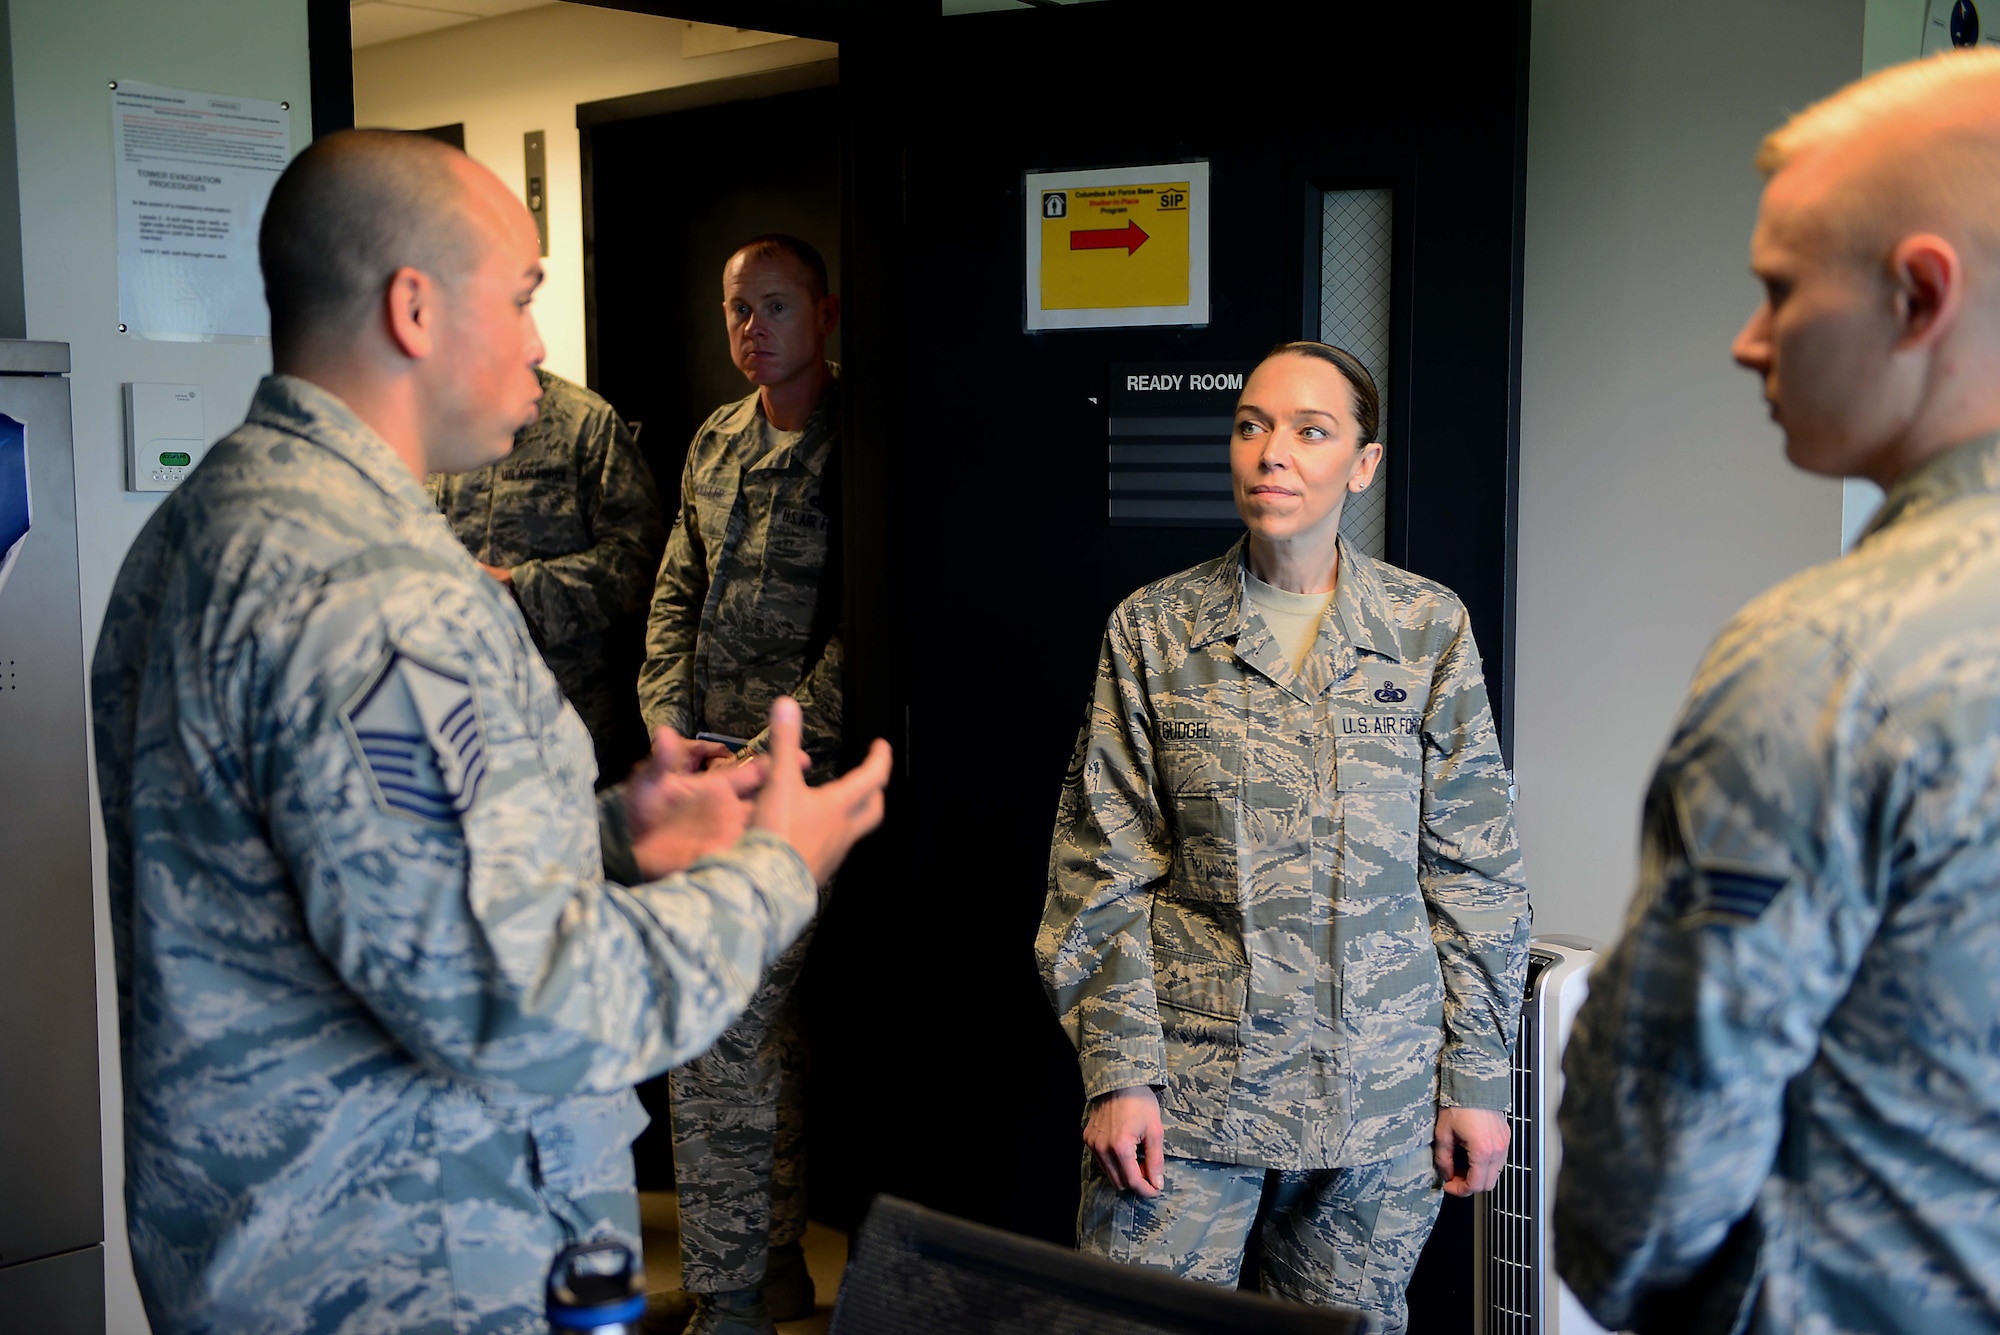 U.S. Air Force Master Sgt. Joshua Matias, 14th Operations Group tower chief air traffic controller speaks with Chief Master Sgt. Juliet Gudgel, command chief of Air Education and Training Command, at Columbus Air Force Base, Mississippi, June 21, 2018. During Gudgel’s tour of Columbus AFB, Matias spoke to her about the ATC tower and the operations conducted daily to produce pilots. (U.S Air Force photo by Airman 1st Class Beaux Hebert)